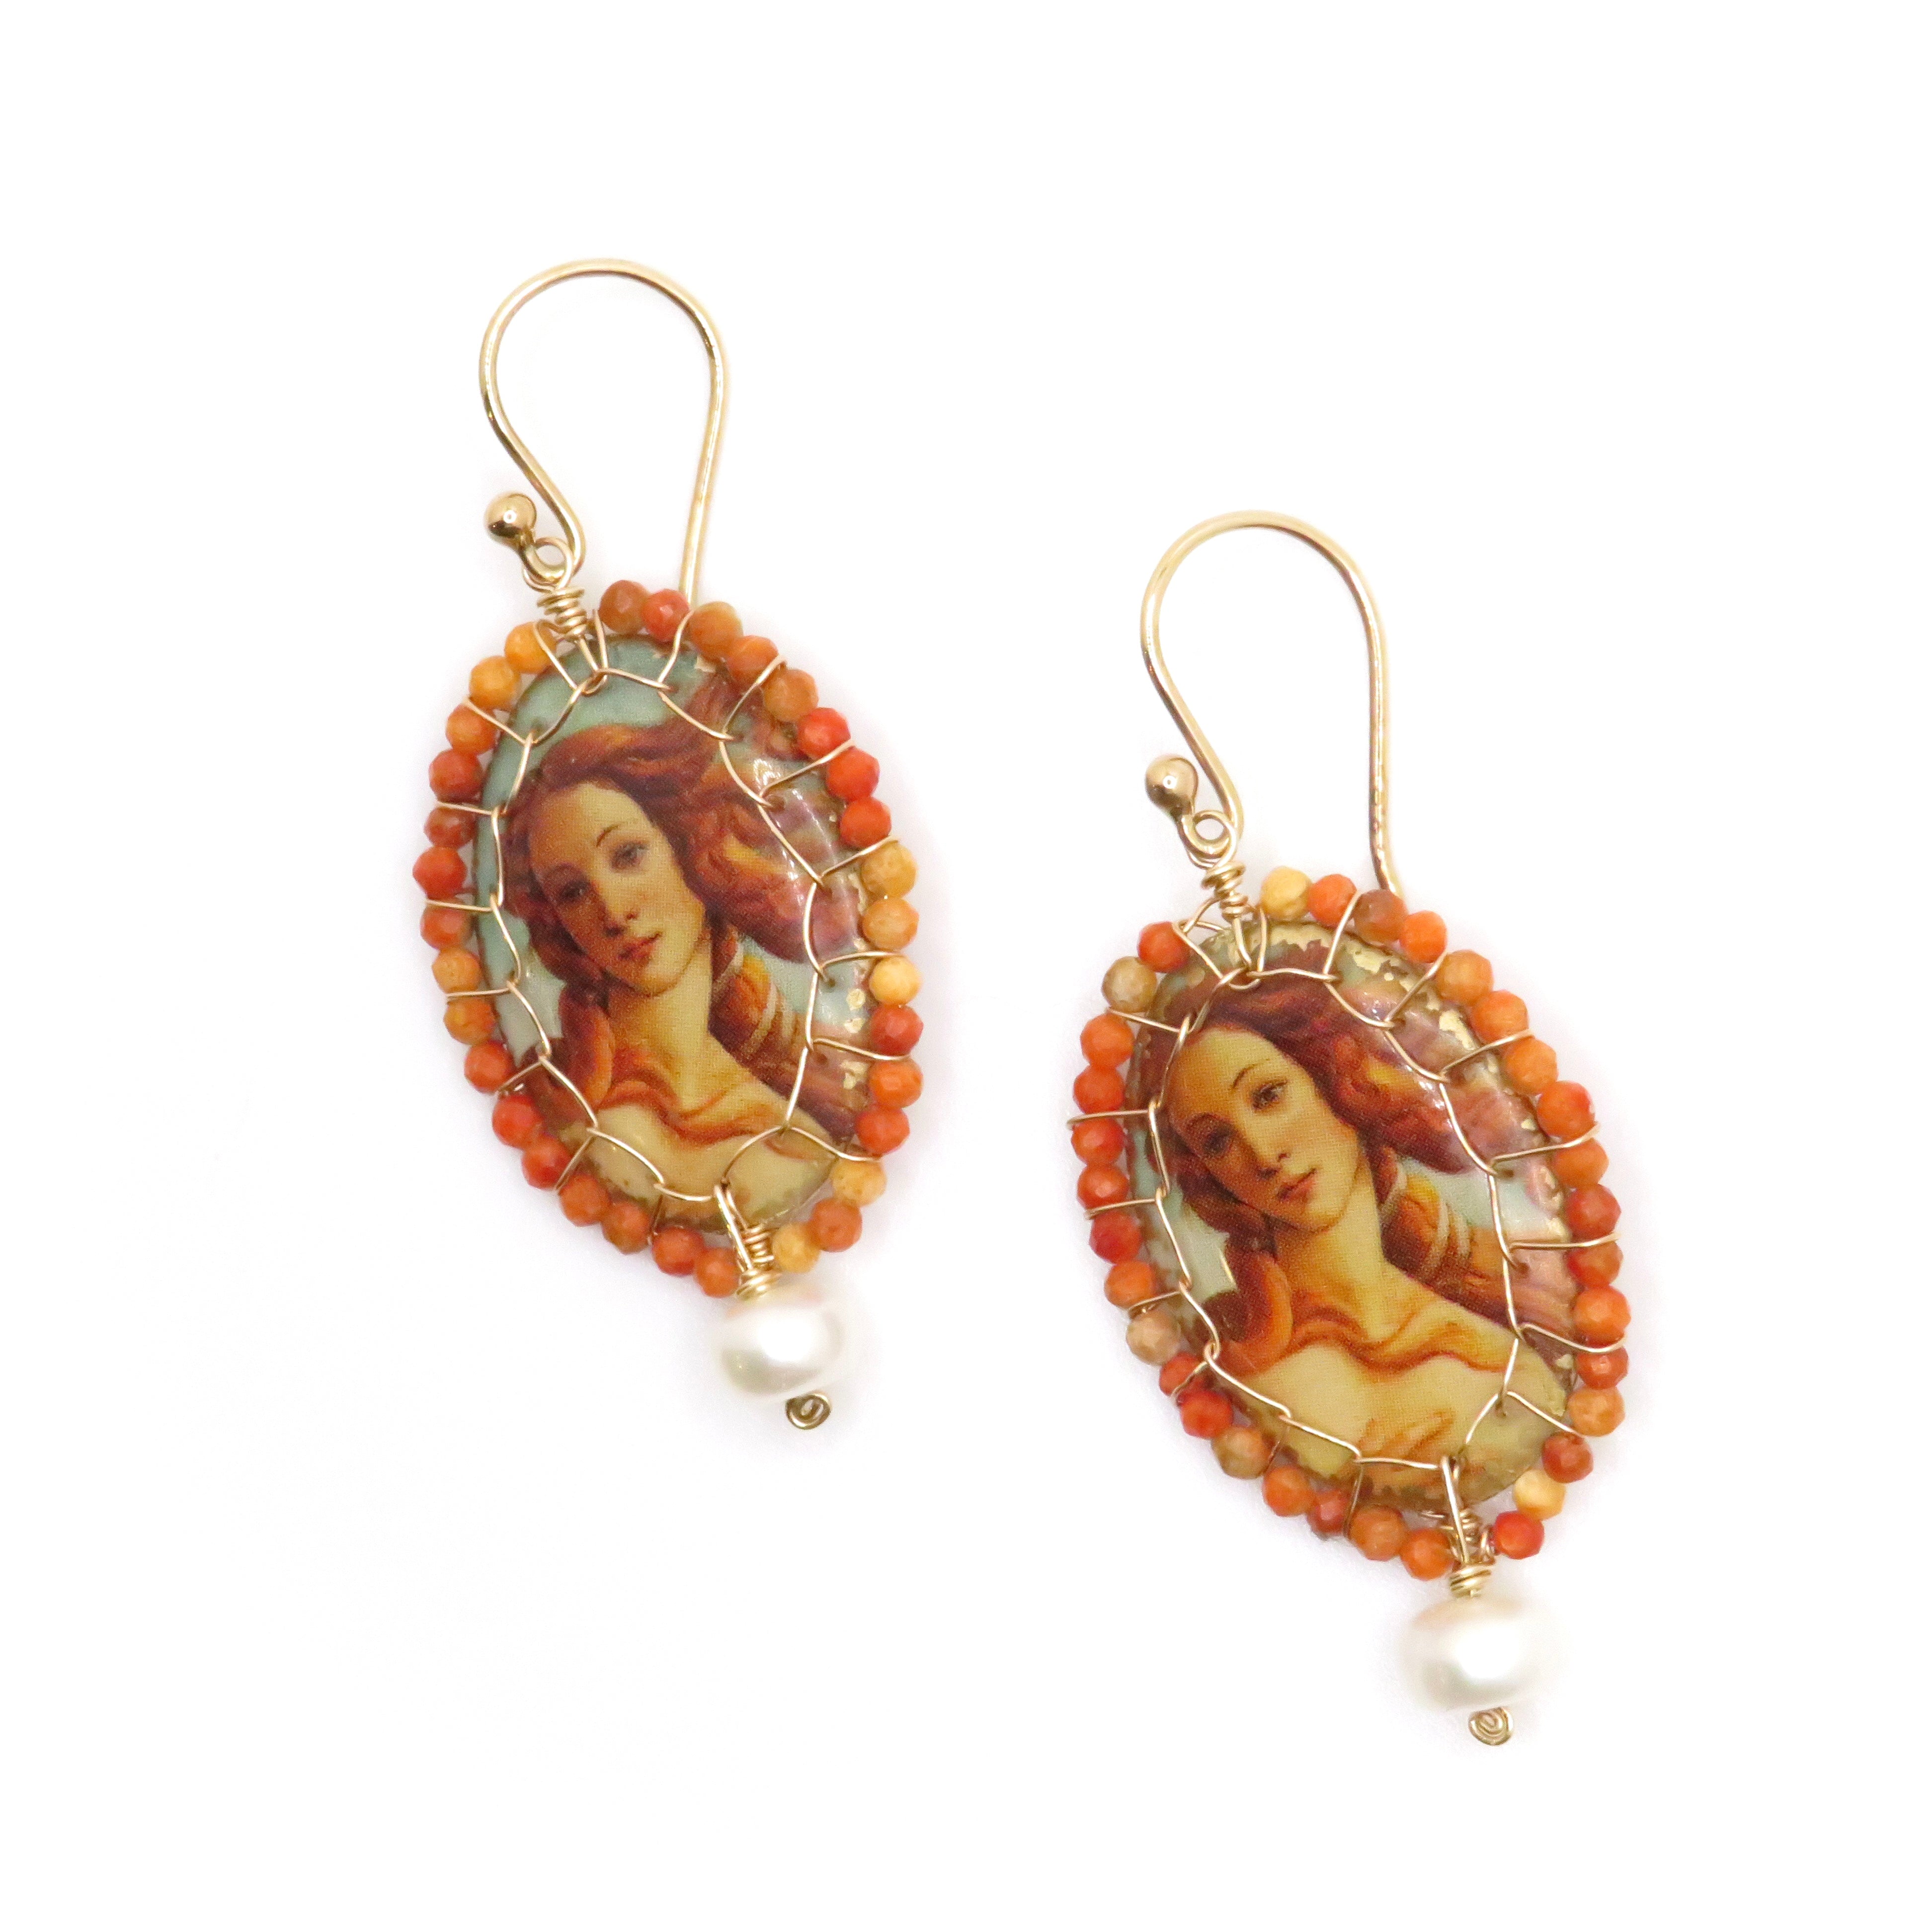 Stitched Victoria Earrings | Birth of Venus